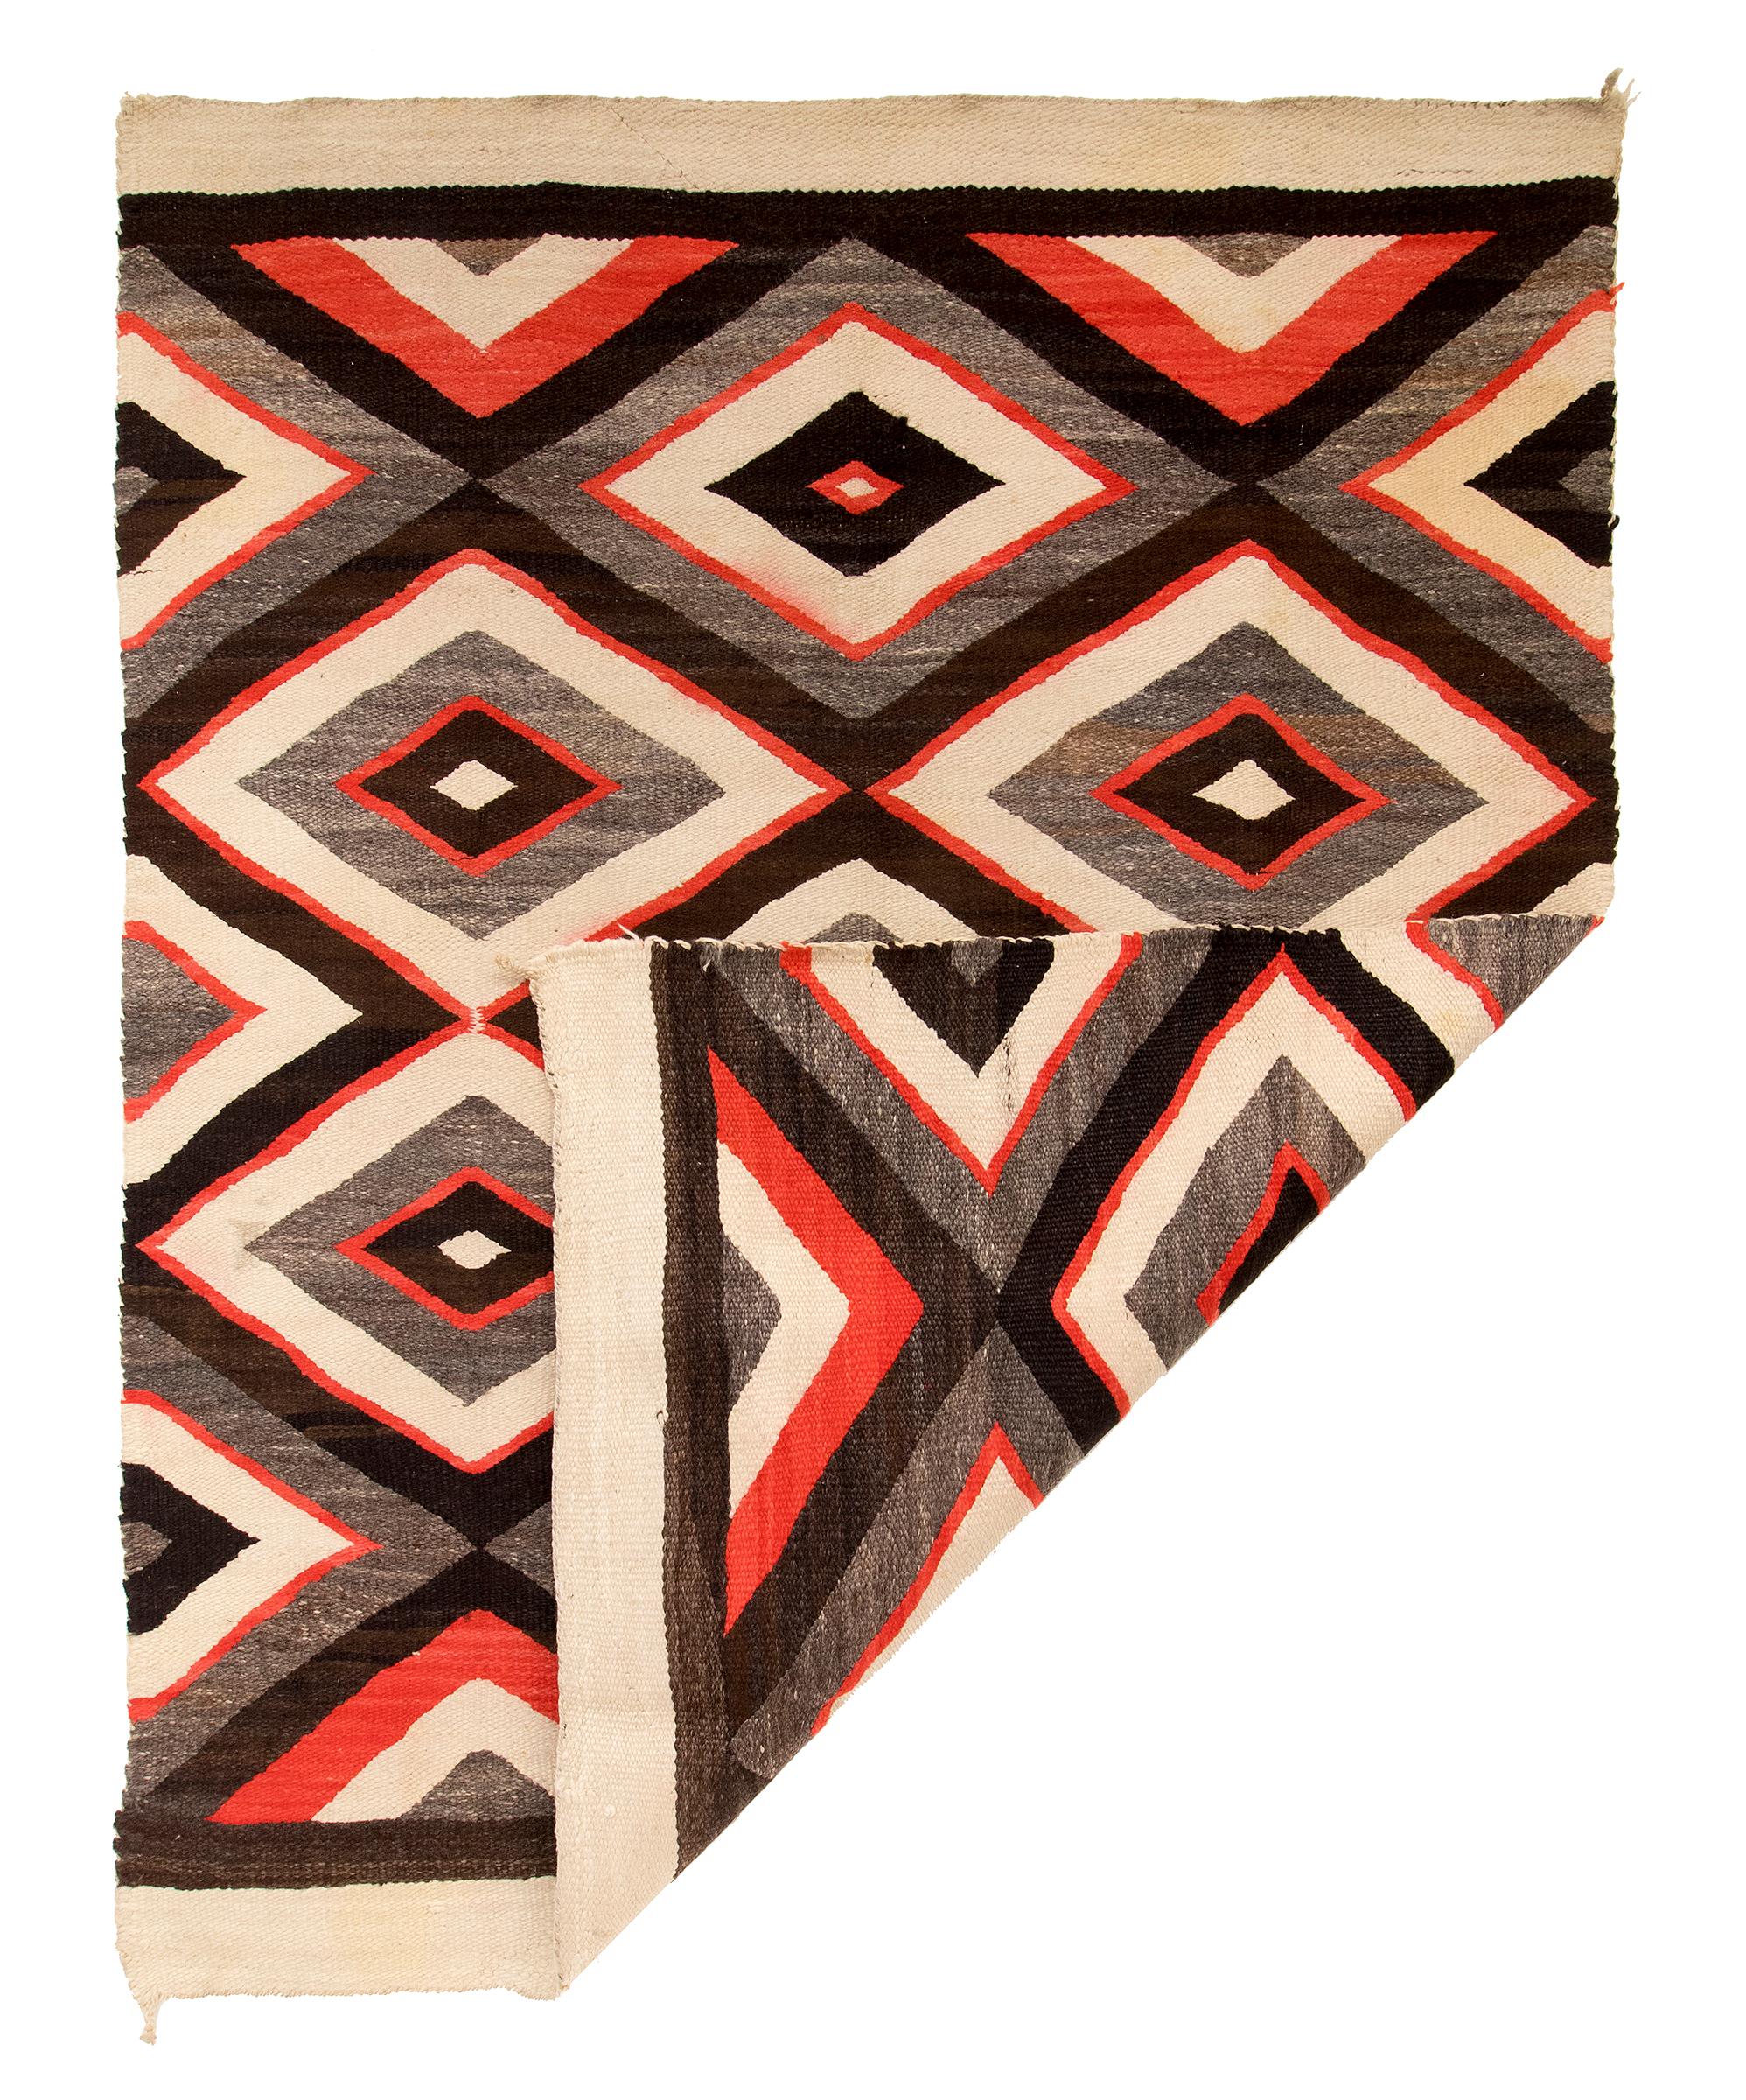 Vintage circa 1920s - 1930s Diné Navajo rug, pan-reservation, Trading Post era. Woven in a diamond pattern of native hand spun wool in natural fleece colors of brown black, gray brown and ivory (white) with aniline dyed red. This textile is well